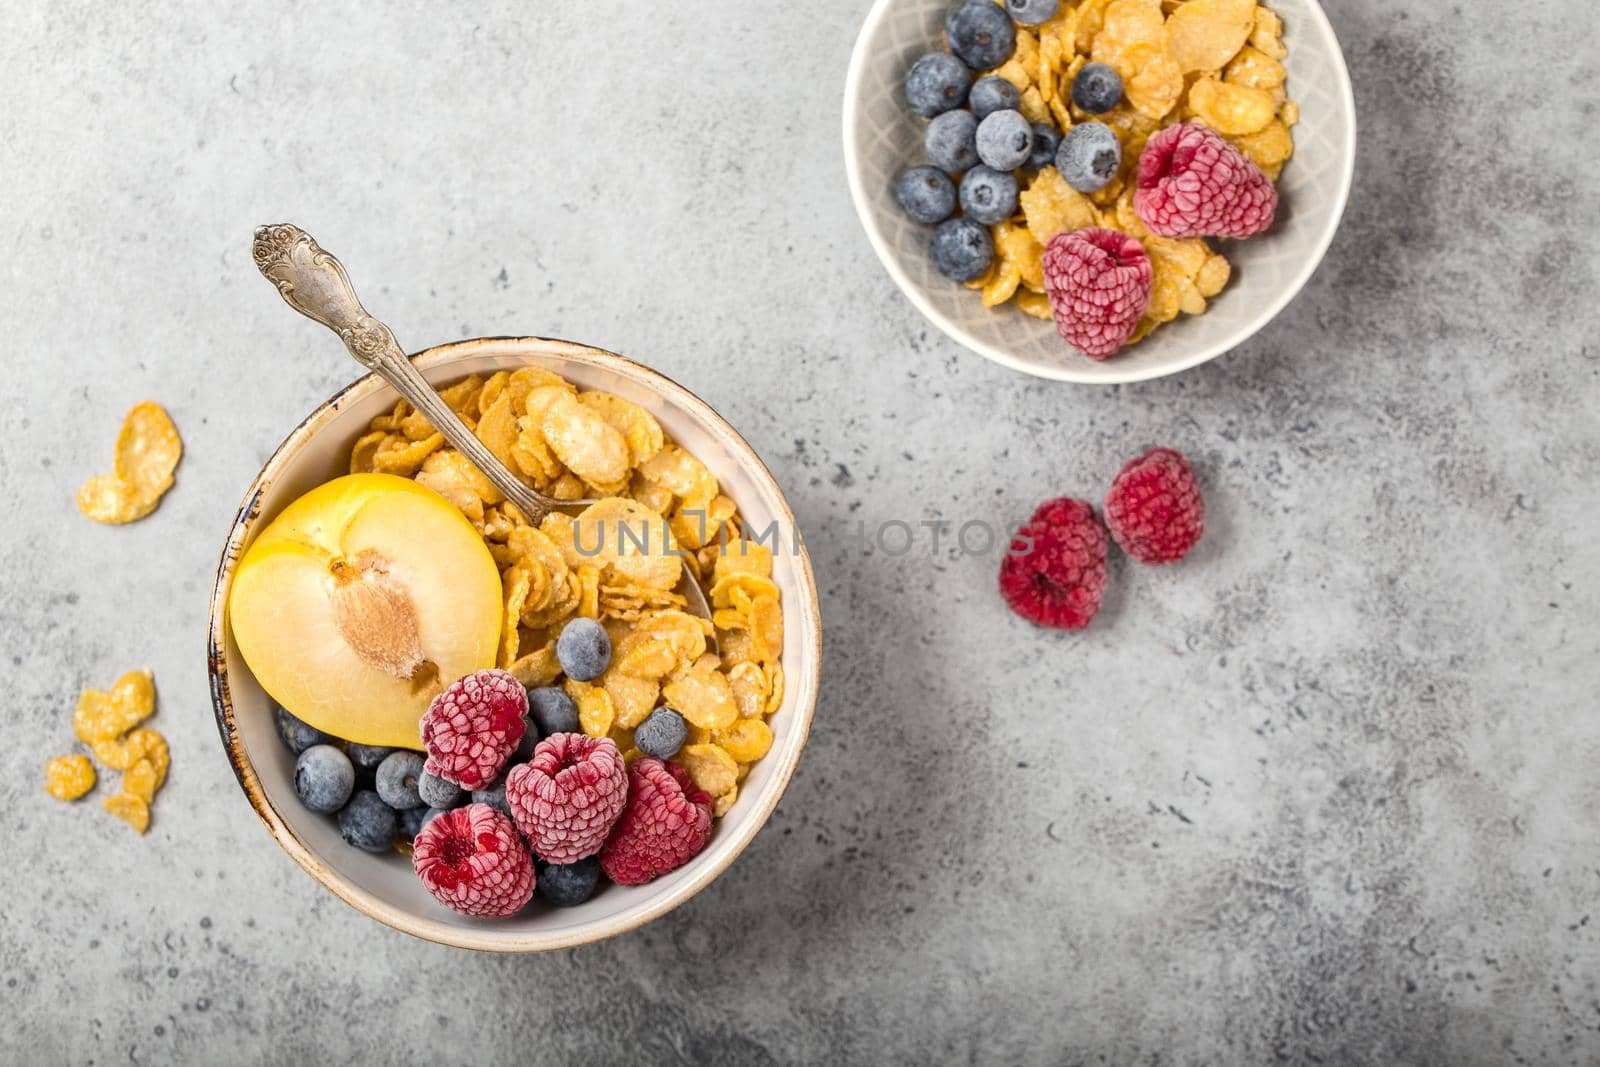 Healthy breakfast bowl, cereals, fresh fruit, berries on table. Clean eating, diet concept. Top view. Healthy bowl with cereals, raspberries, blueberries, plum. Space for text. Selective focus.